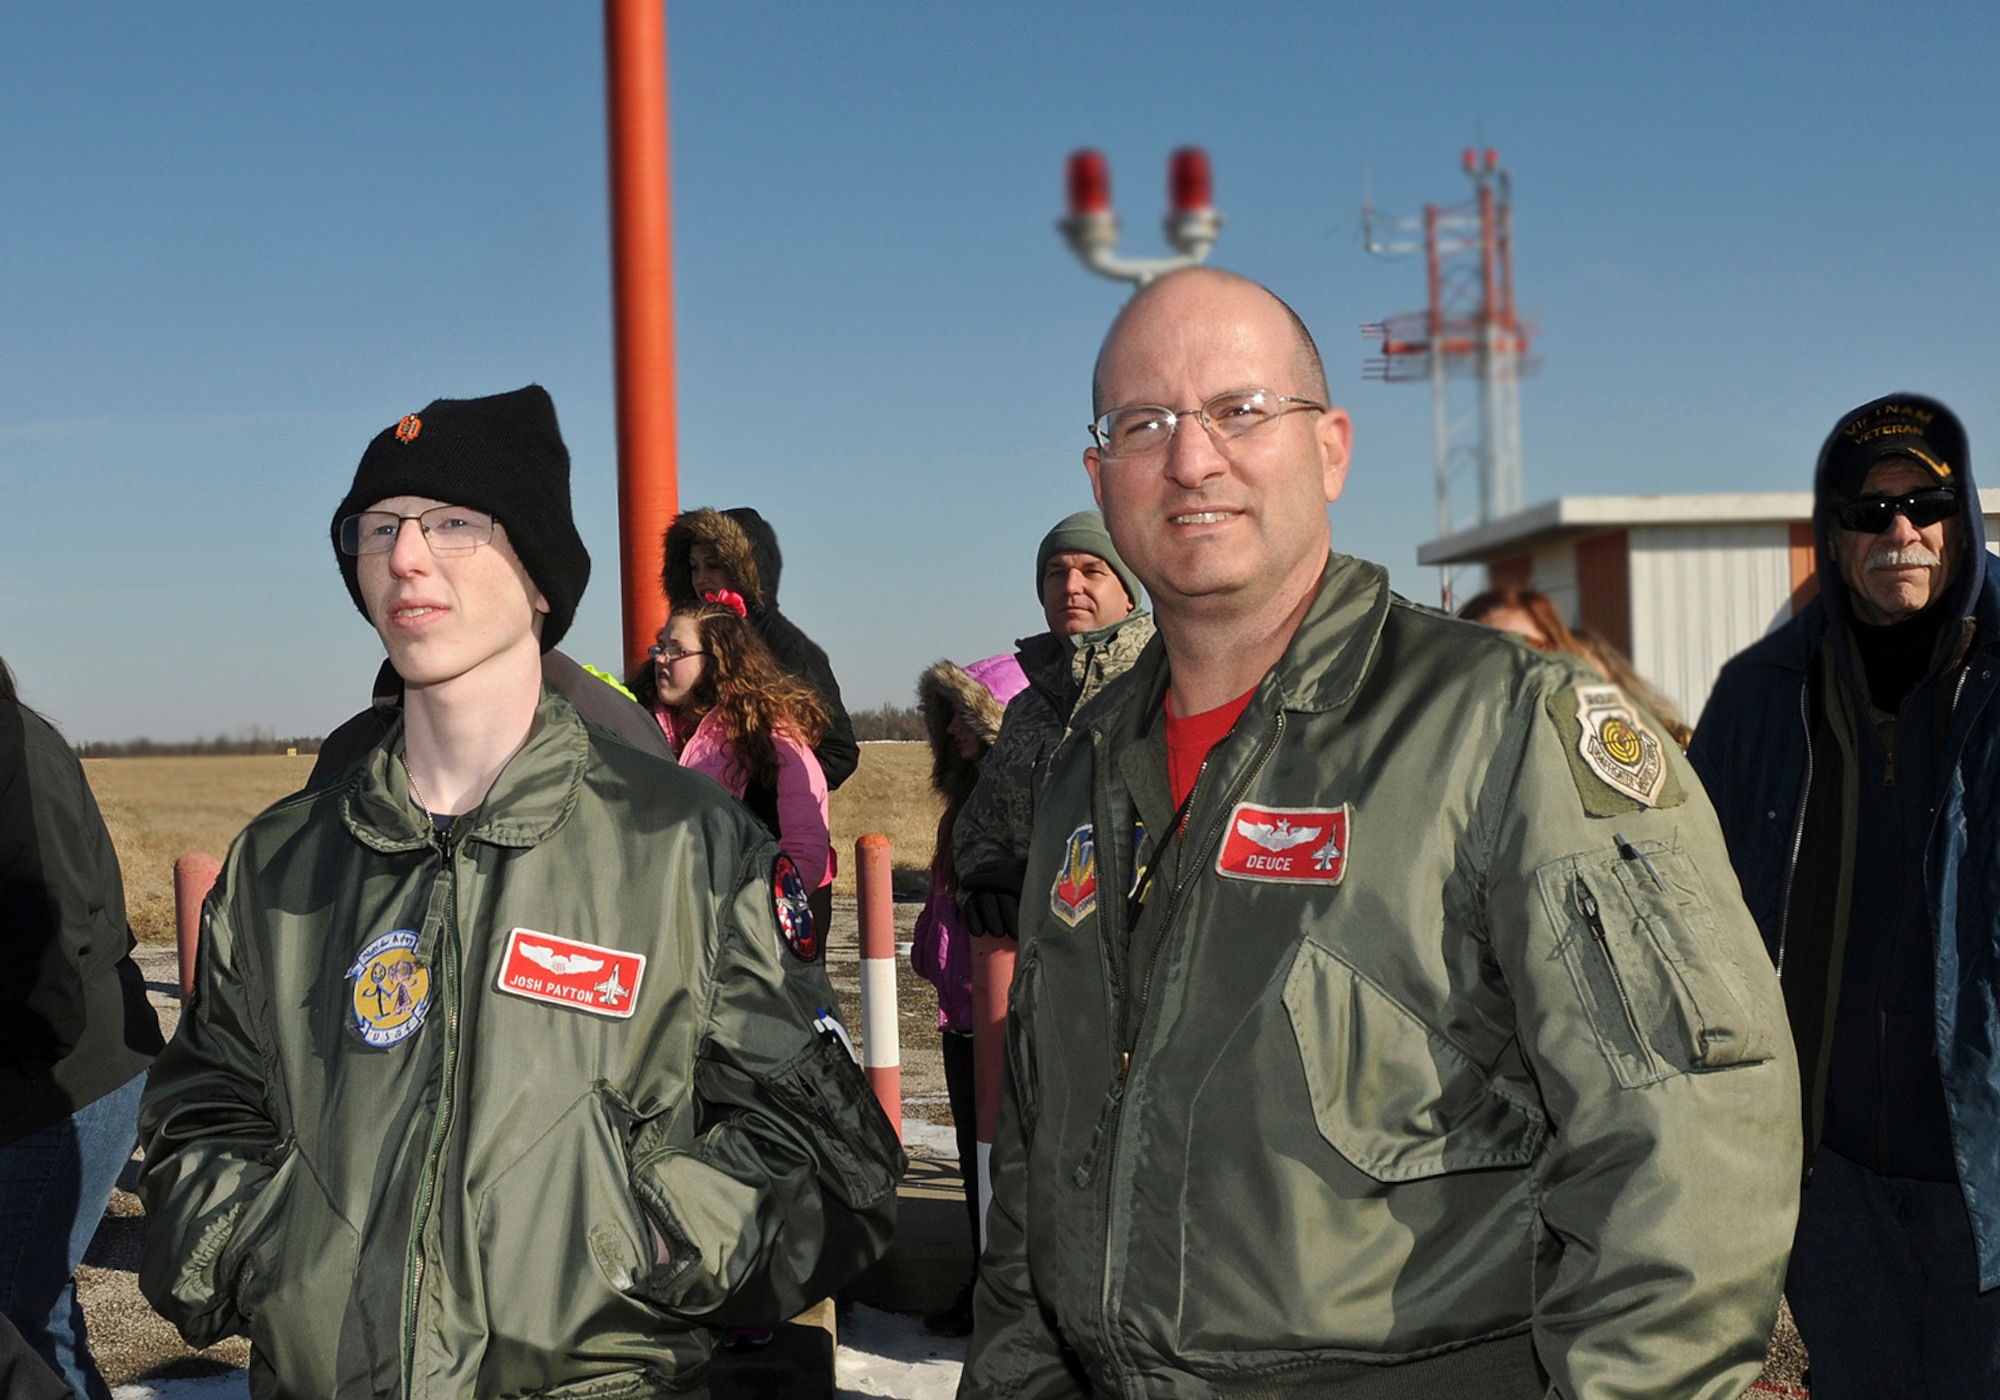 Josh Payton, the 138th Fighter Wing's "pilot for a day" and Maj. Michael "Deuce" Scorsone watch F-16's take off near the runway Feb. 19, 2015, at the Tulsa Air National Guard base, Tulsa, Okla.  The pilot for a day program is intended to recognize and honor children with potentially life threatening illnesses and started at the 138th in May 2012, and has hosted seven children since it began.  (U.S. National Guard photo by Senior Master Sgt.  Preston L. Chasteen/Released)